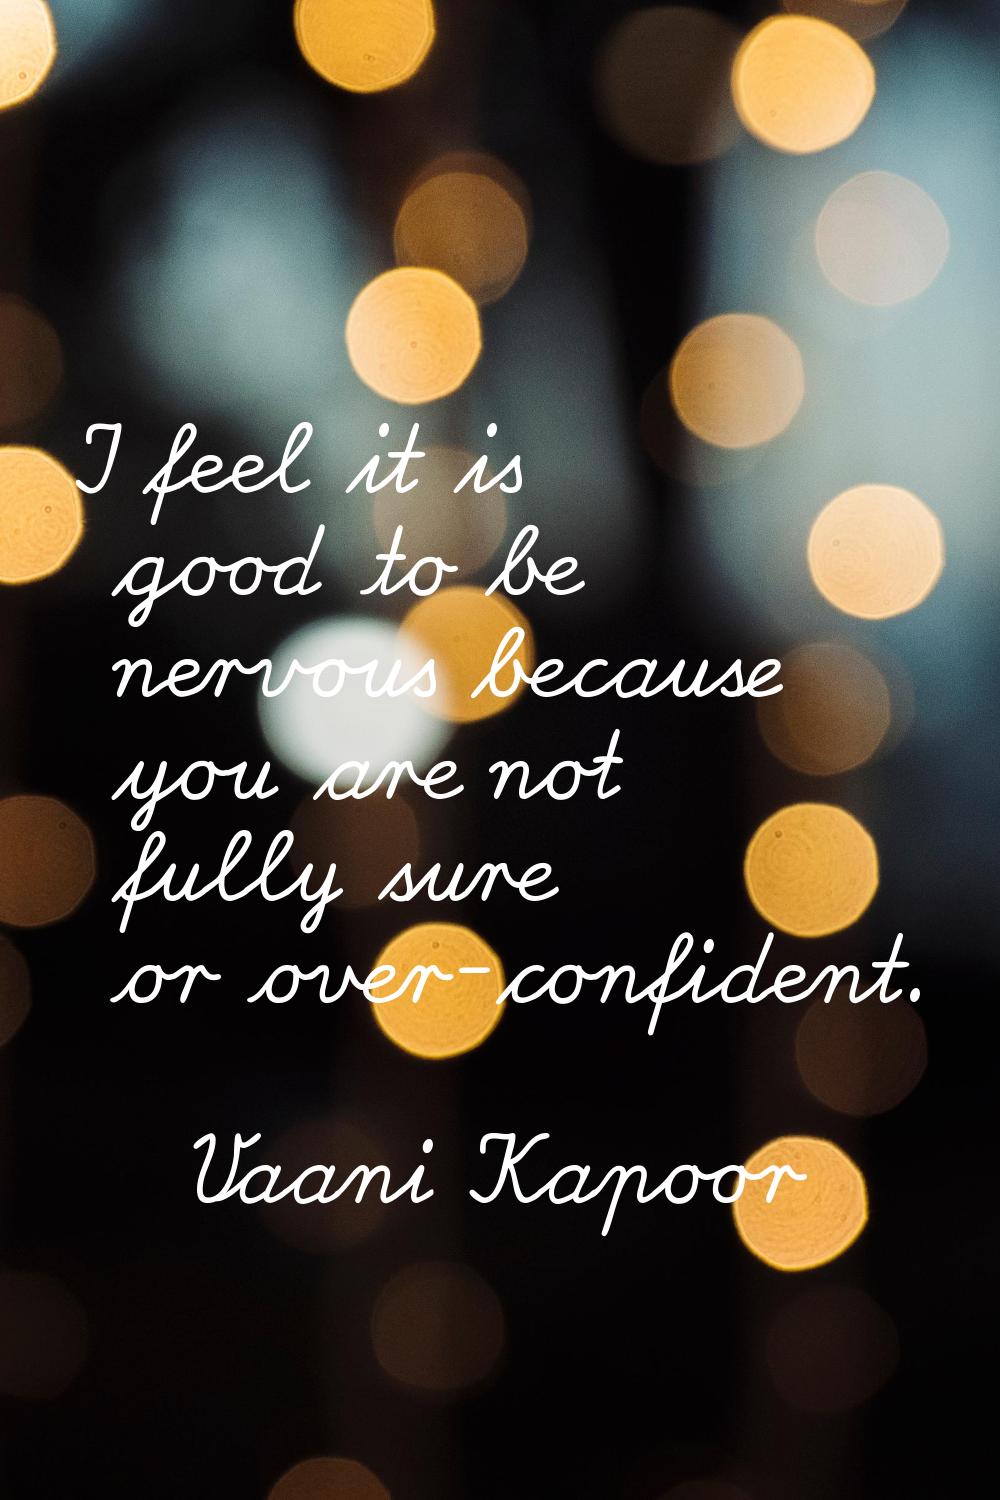 I feel it is good to be nervous because you are not fully sure or over-confident.